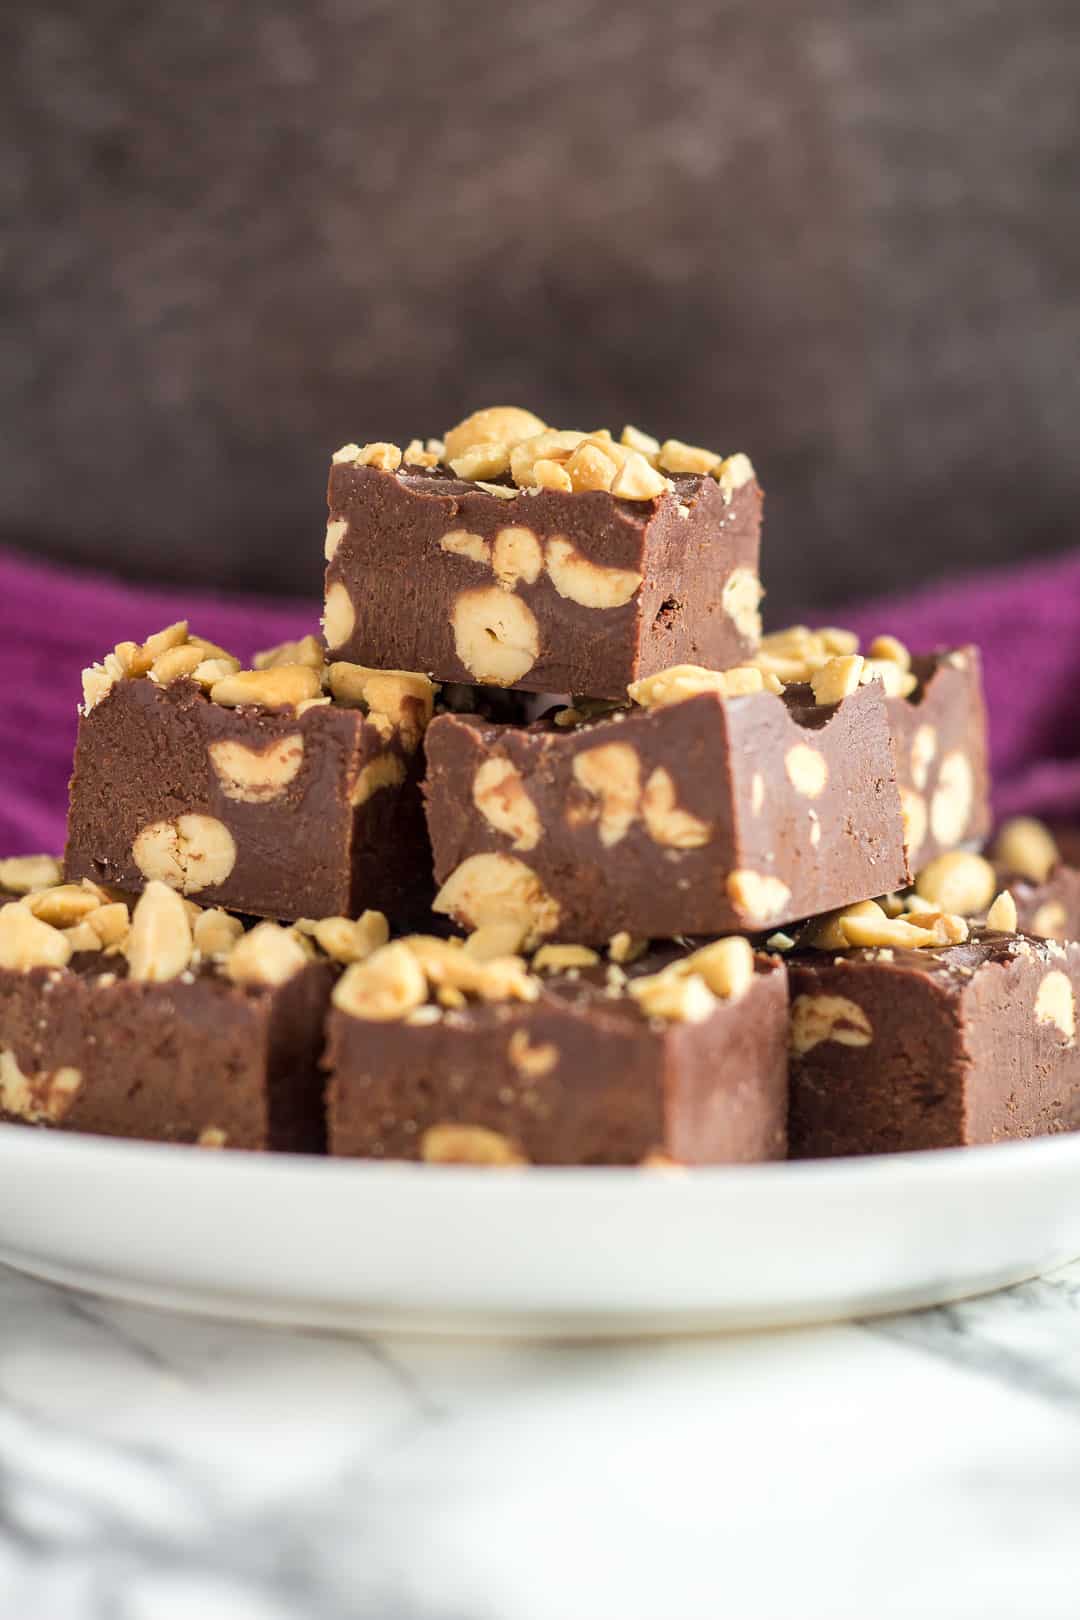 Chocolate Peanut Butter Fudge; Top 7 Chocolate Fudge Recipes for Valentine's Day compiled by Jane Bonacci, The Heritage Cook 2019